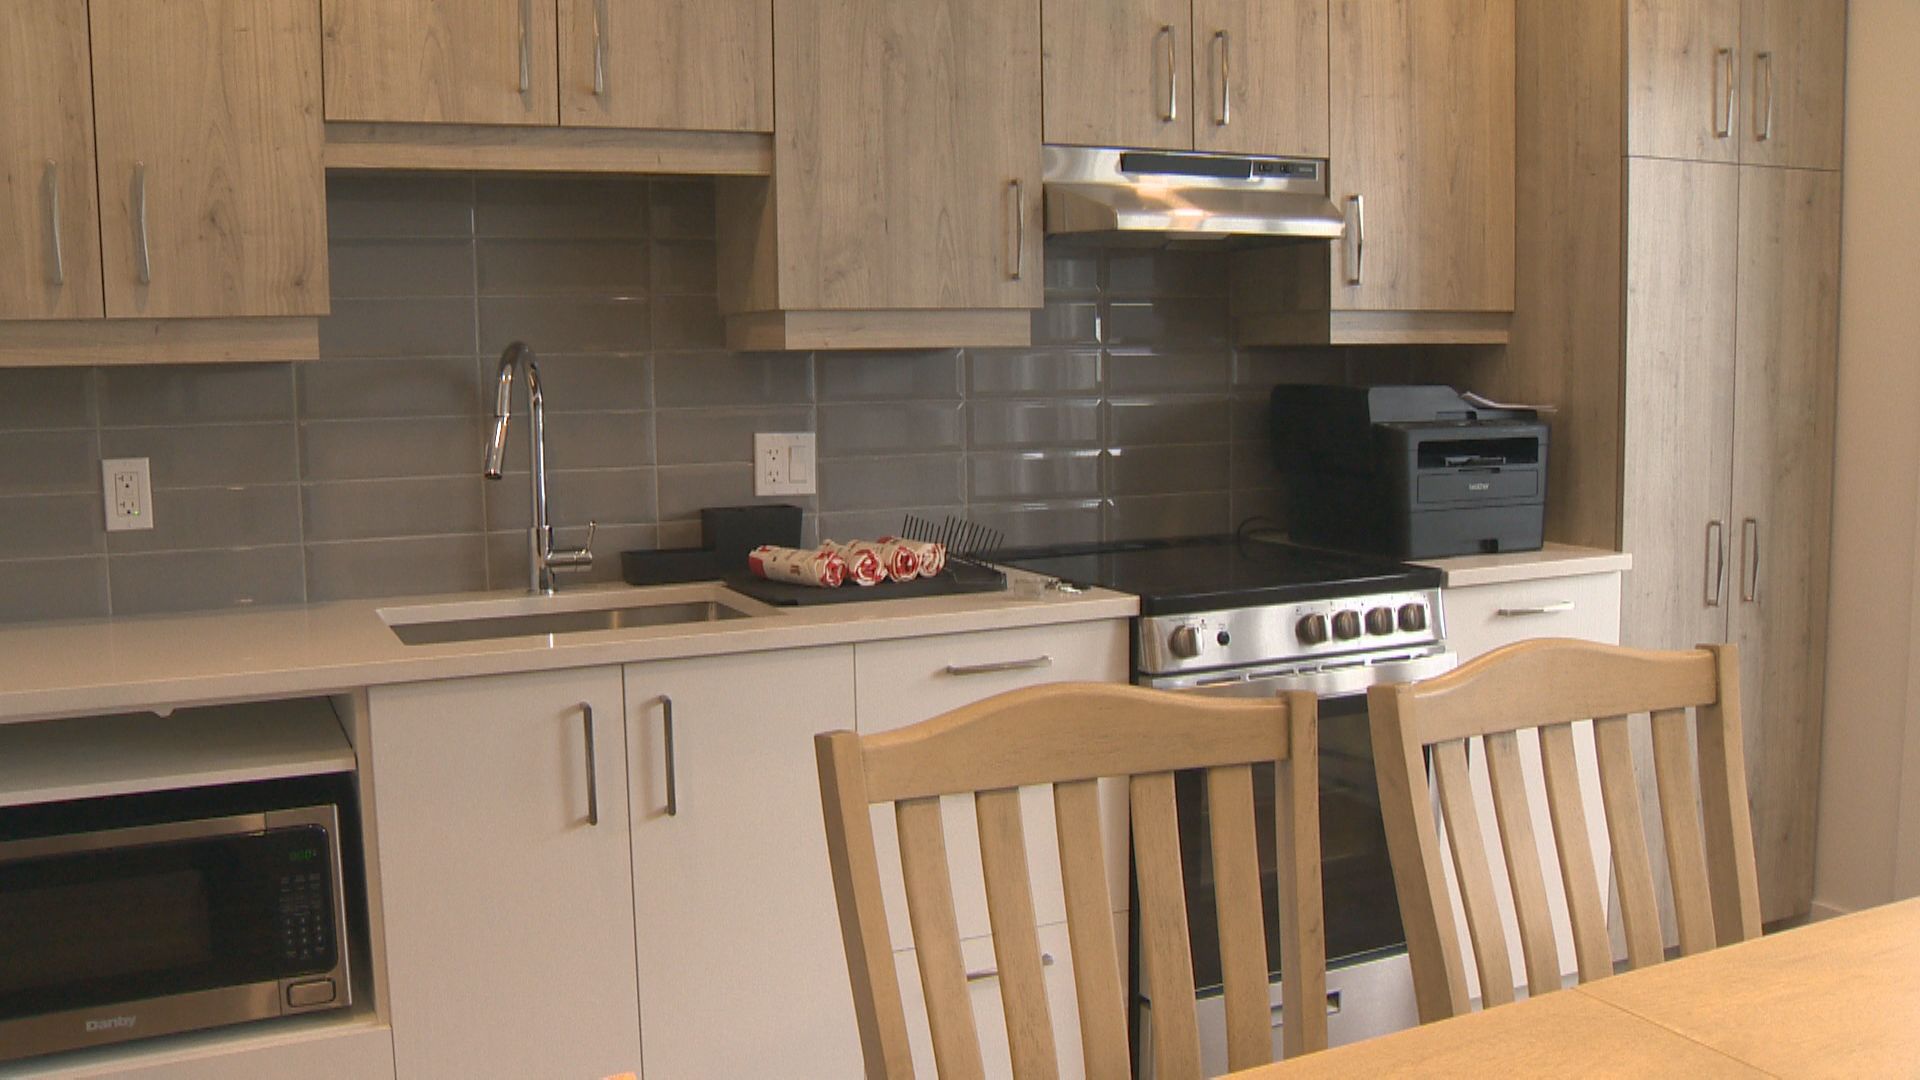 New housing unit for women escaping violent partners opens in Montreal’s east end